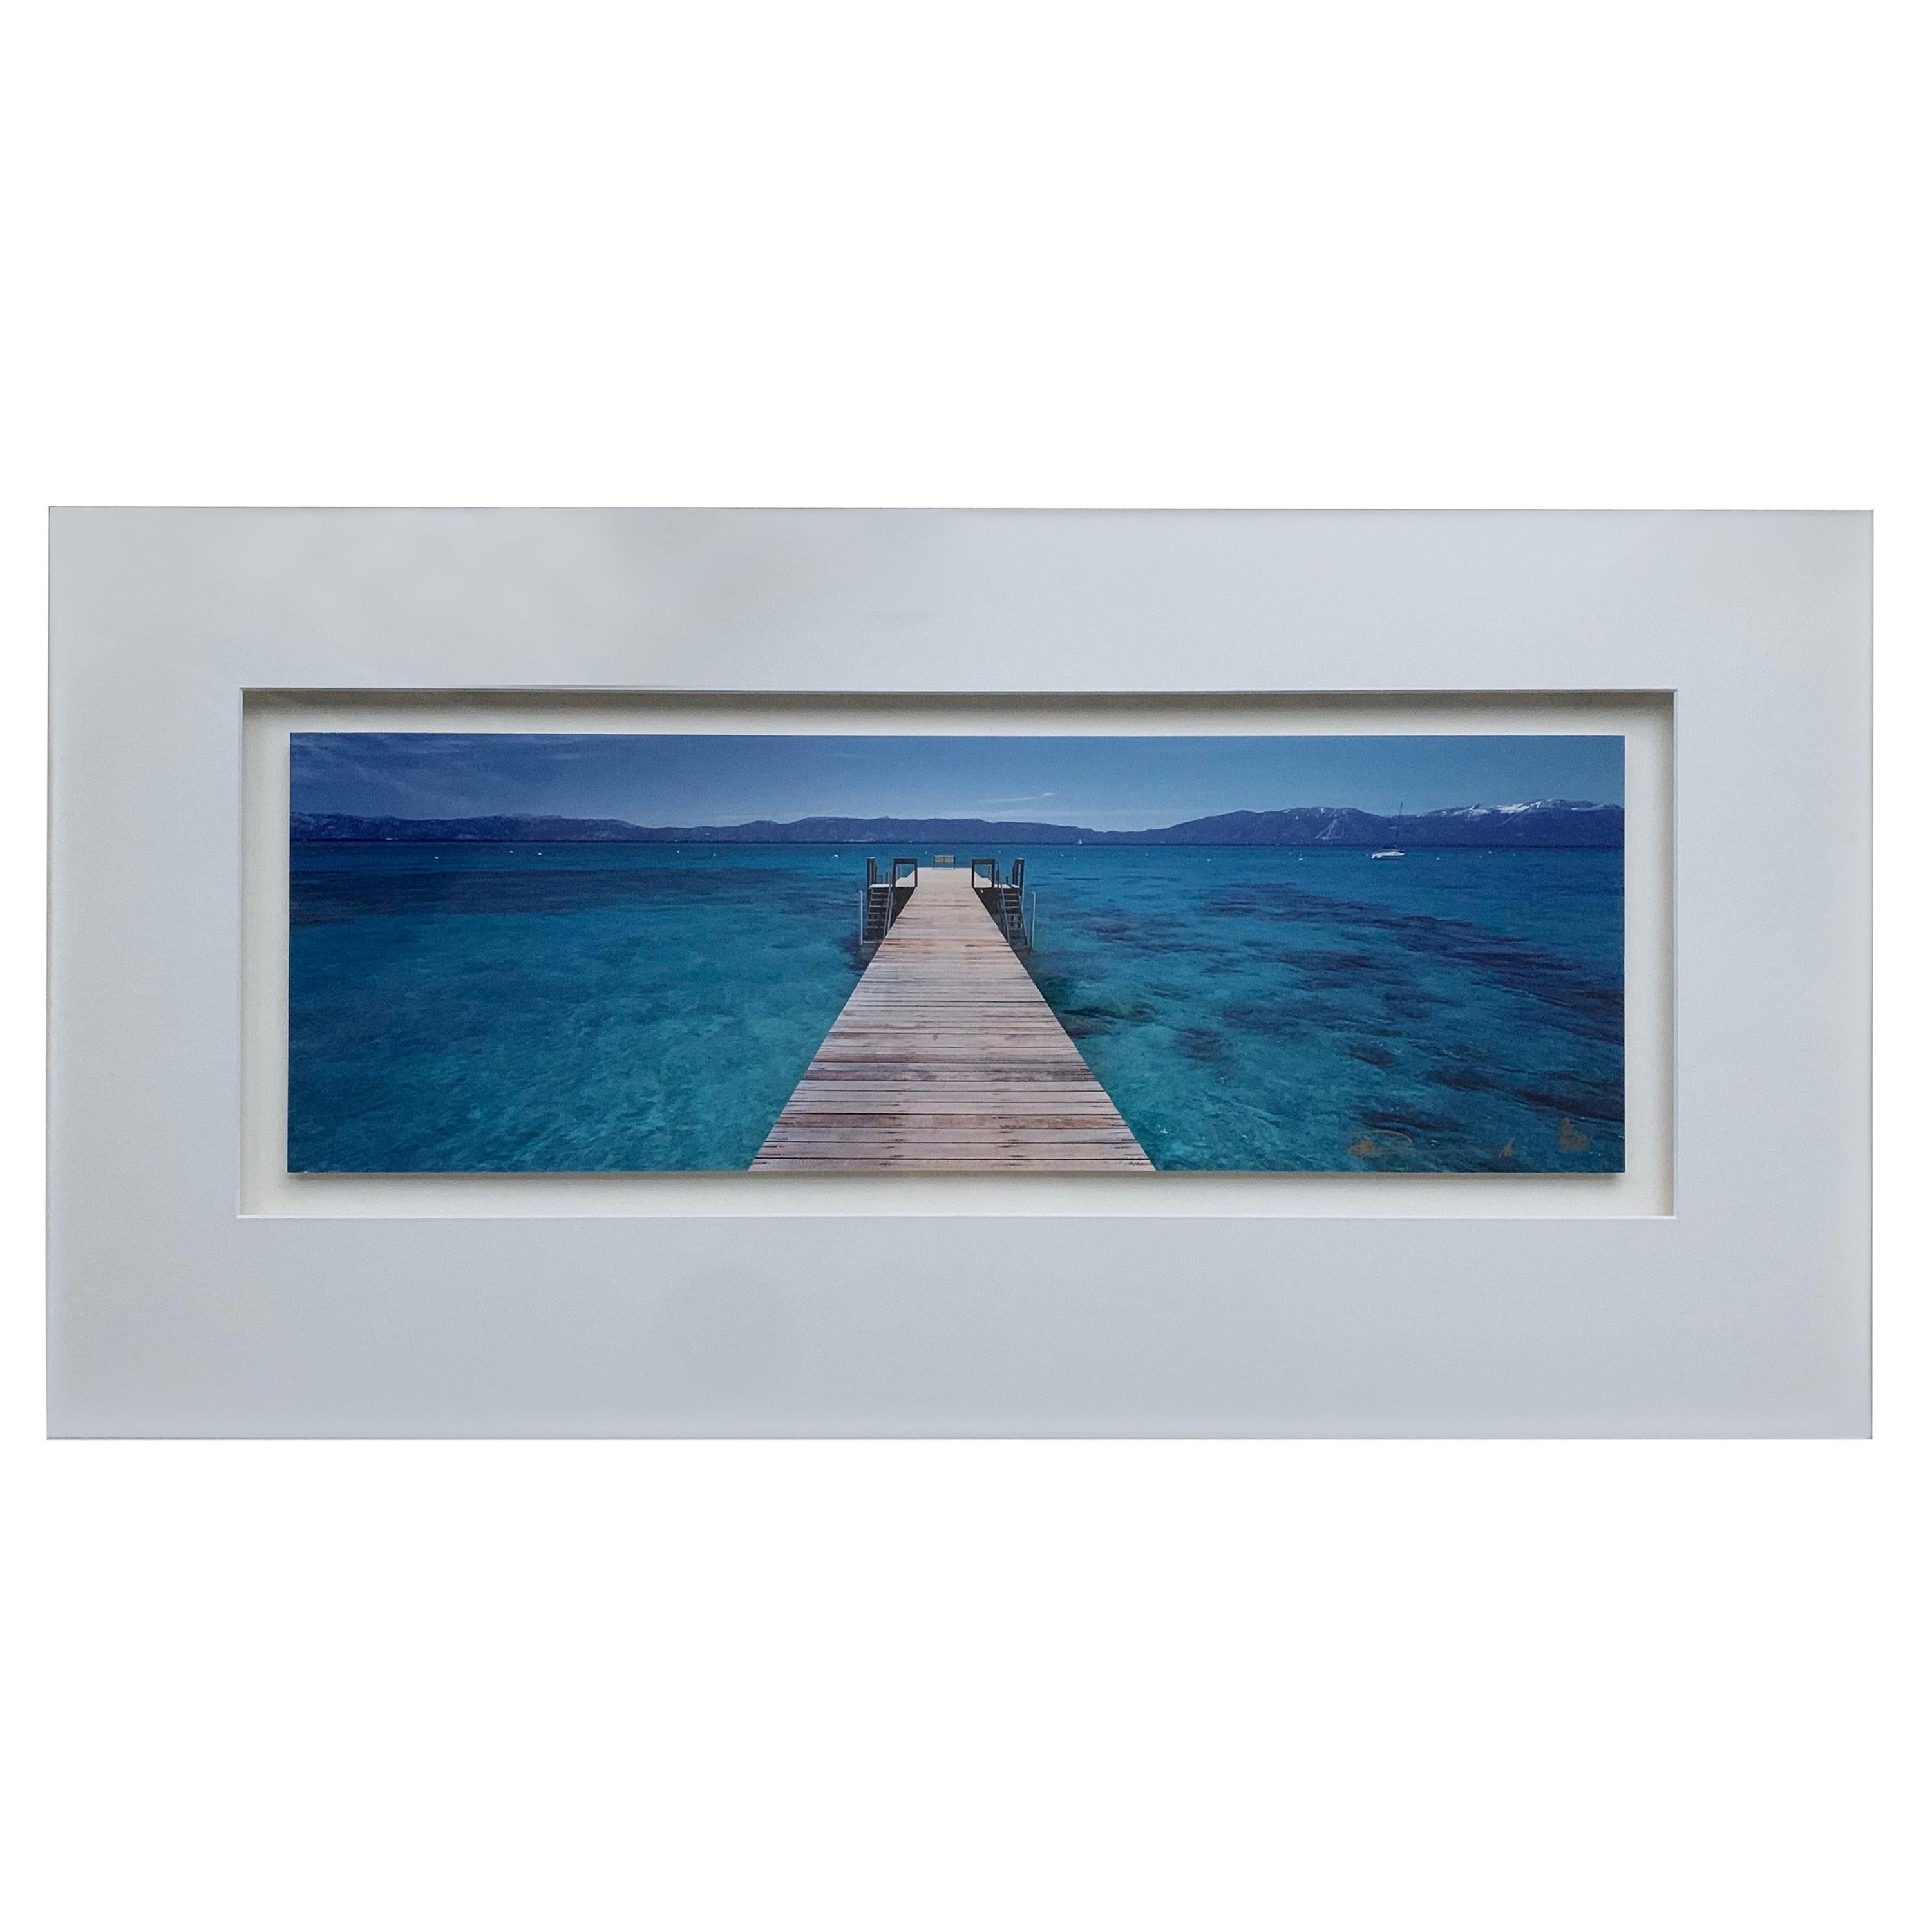 Peter Lik Tahoe Jetty 2/950 Limited Edition Gallery Mounted  For Sale